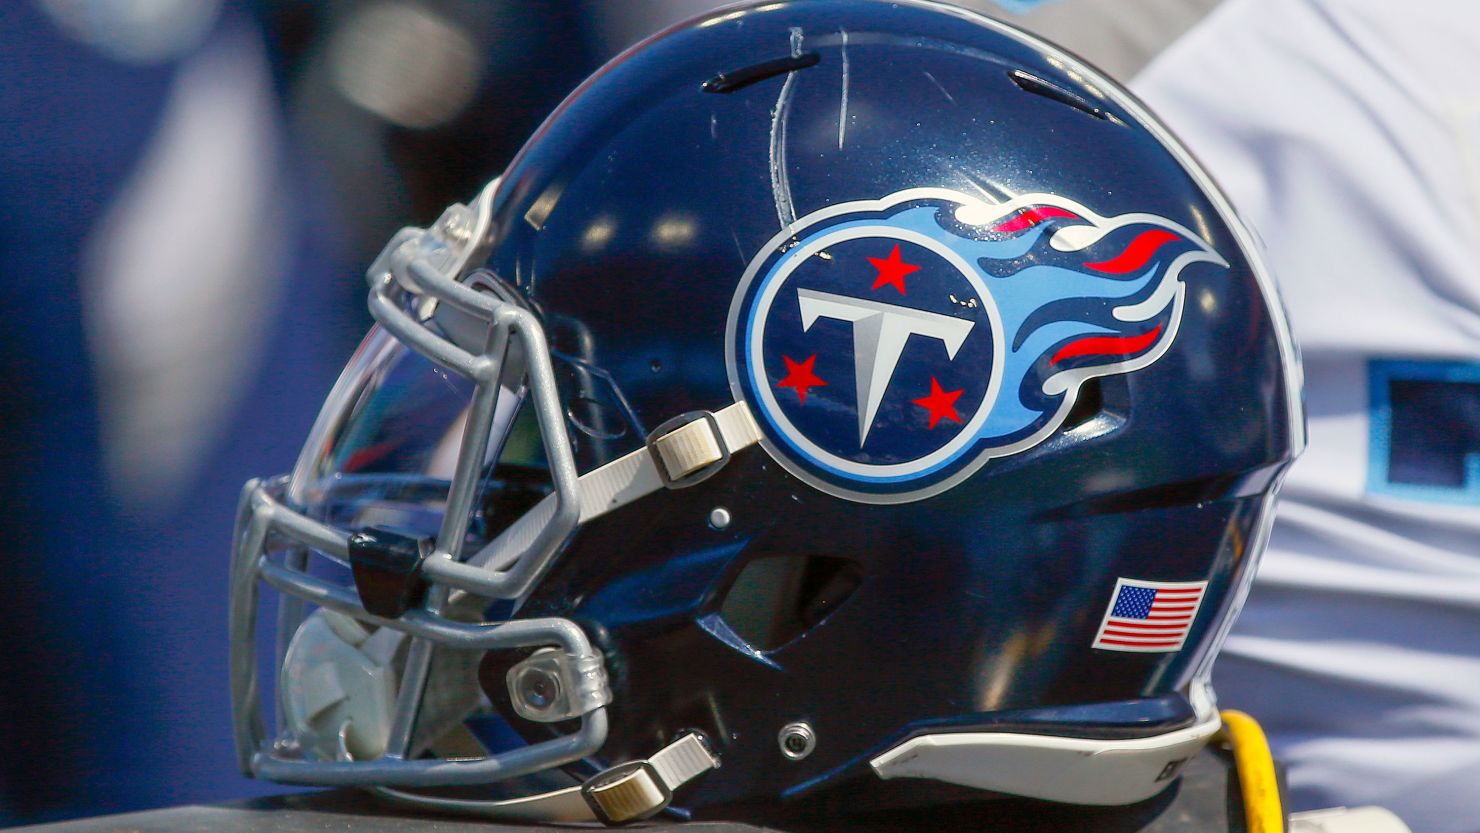 The Tennessee Titans have had a number of players and personnel test positive for Covid-19.